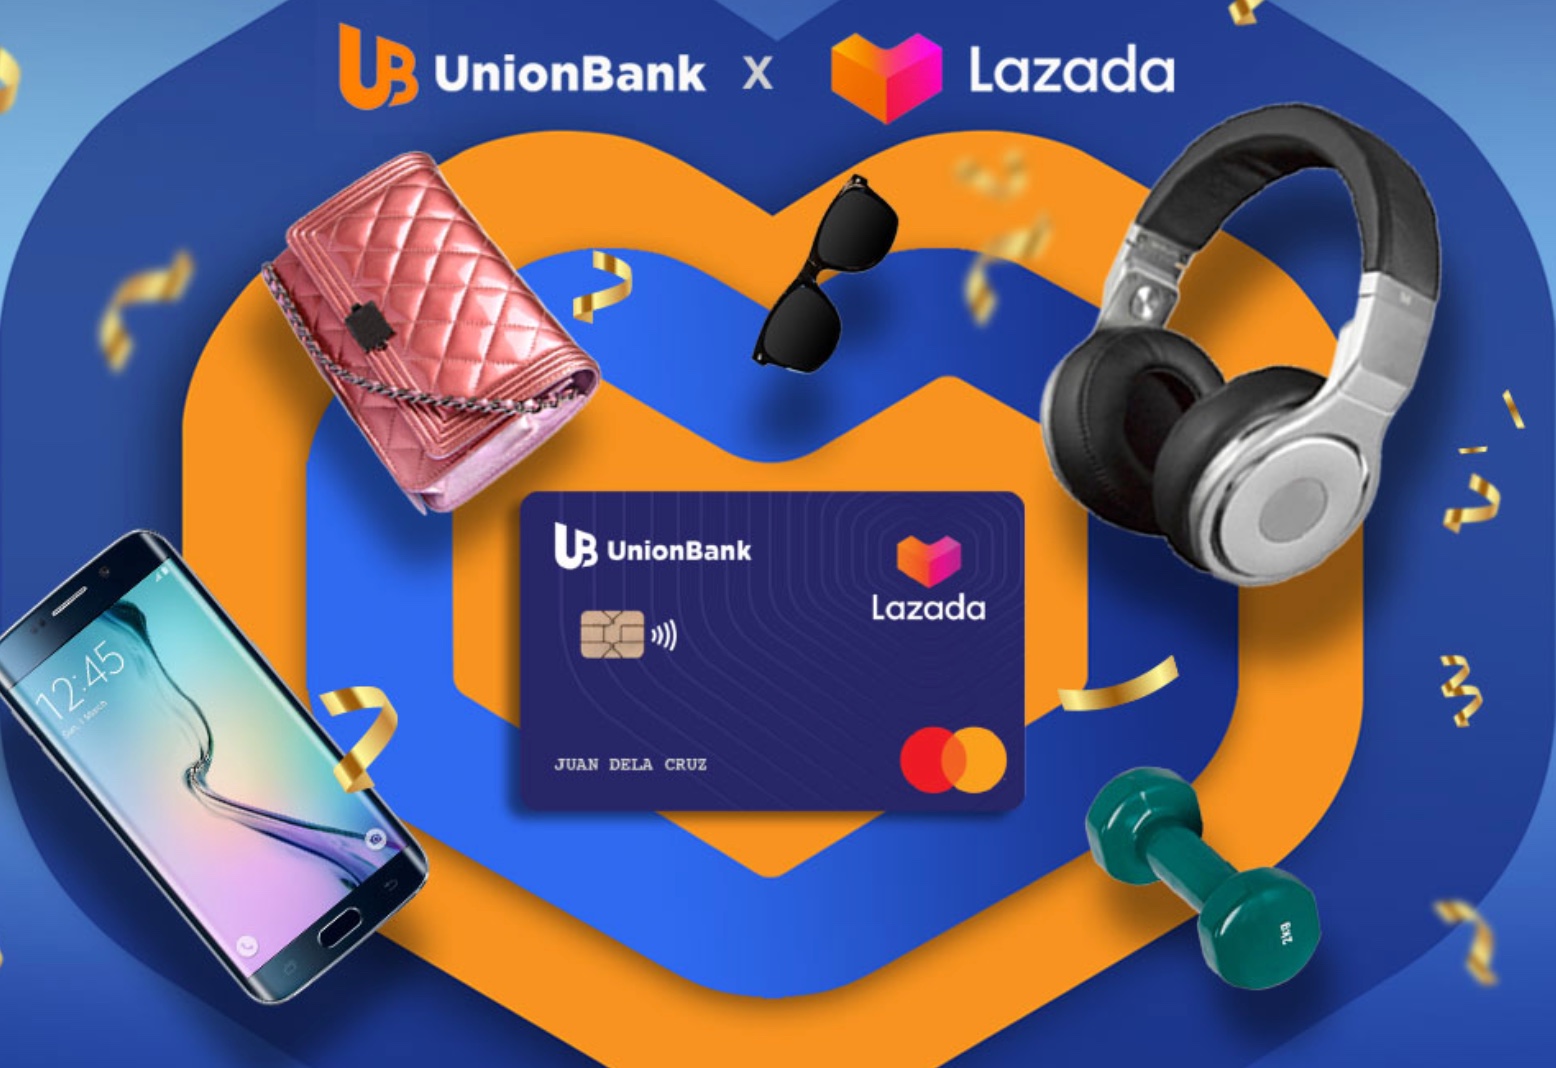 UnionBank Lazada Credit Card offers cardholders exclusive online shopping rewards and perks on Lazada